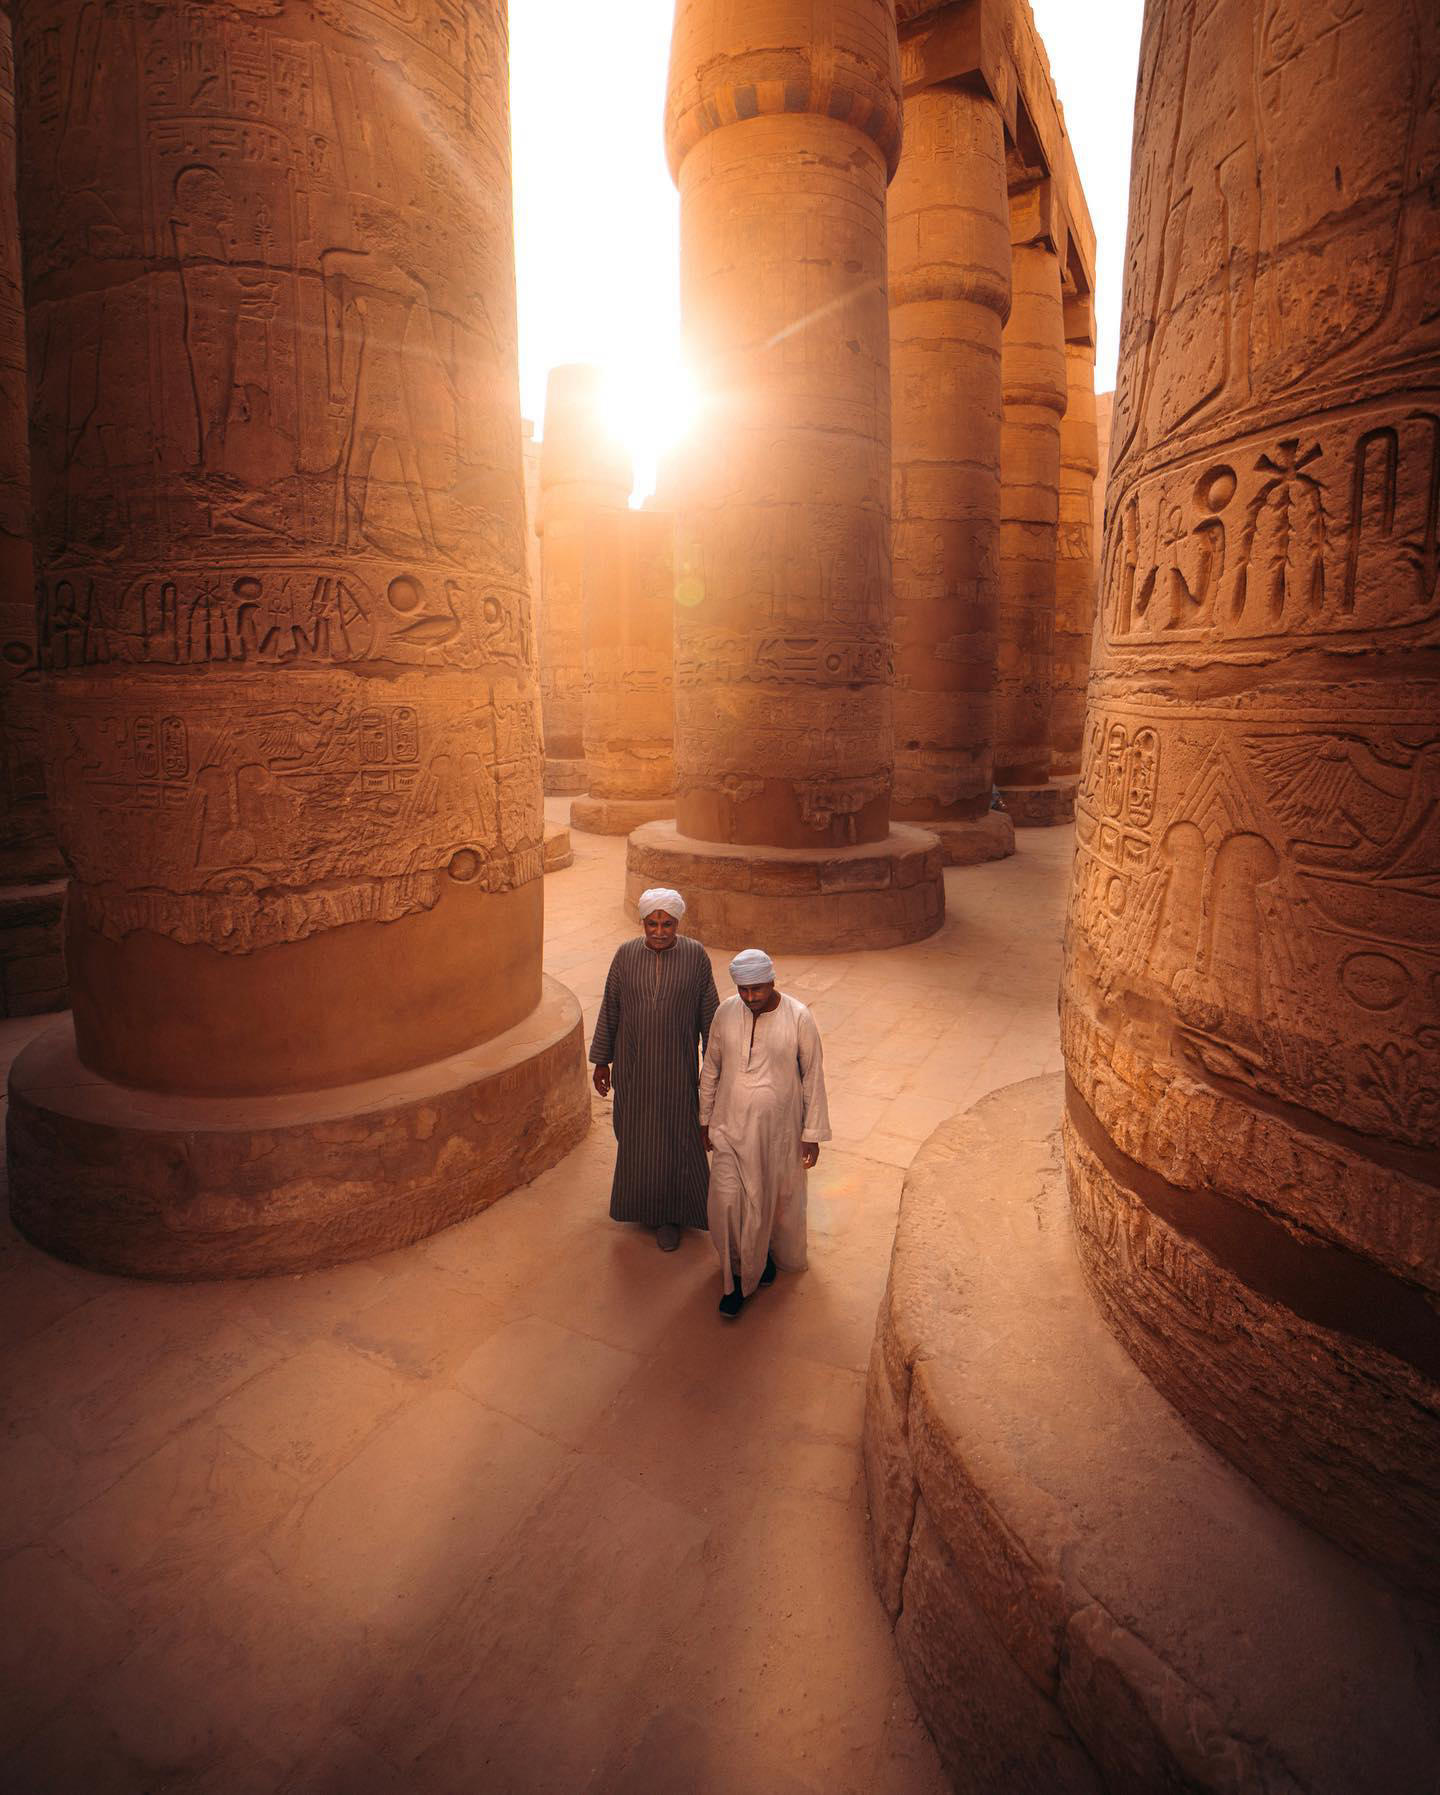 Photos from a stunning trip through Egypt with #projectwahba and #isaiah